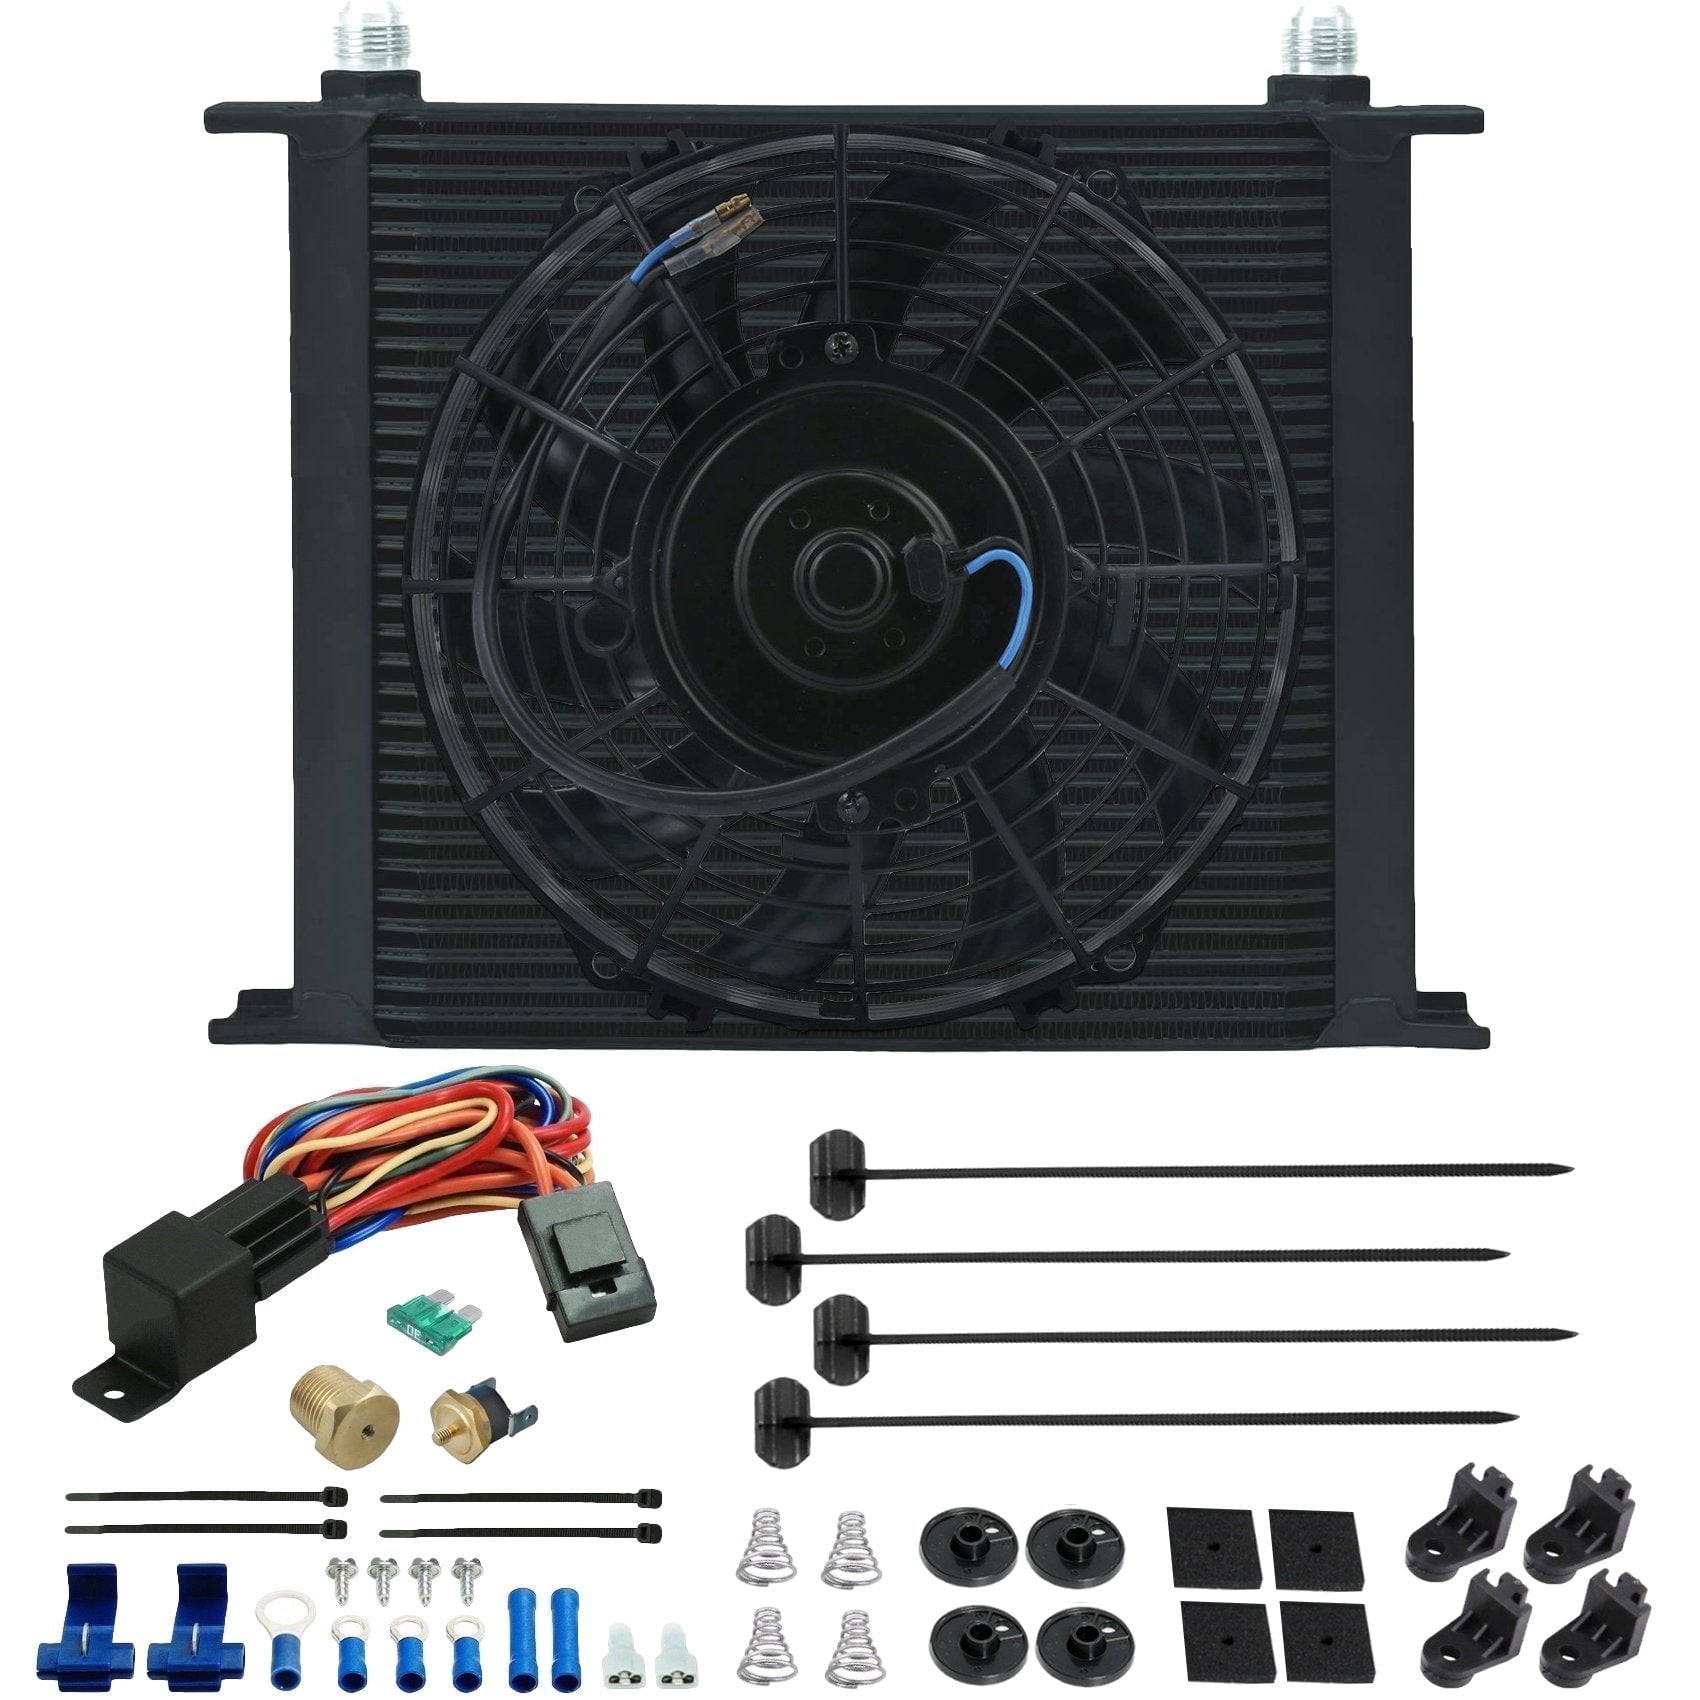 180F On - 165F Off American Volt Heavy Duty 11 Transmission Oil Cooler 9 Inch Electric Fan & Push-in Probe Thermostat Switch Kit